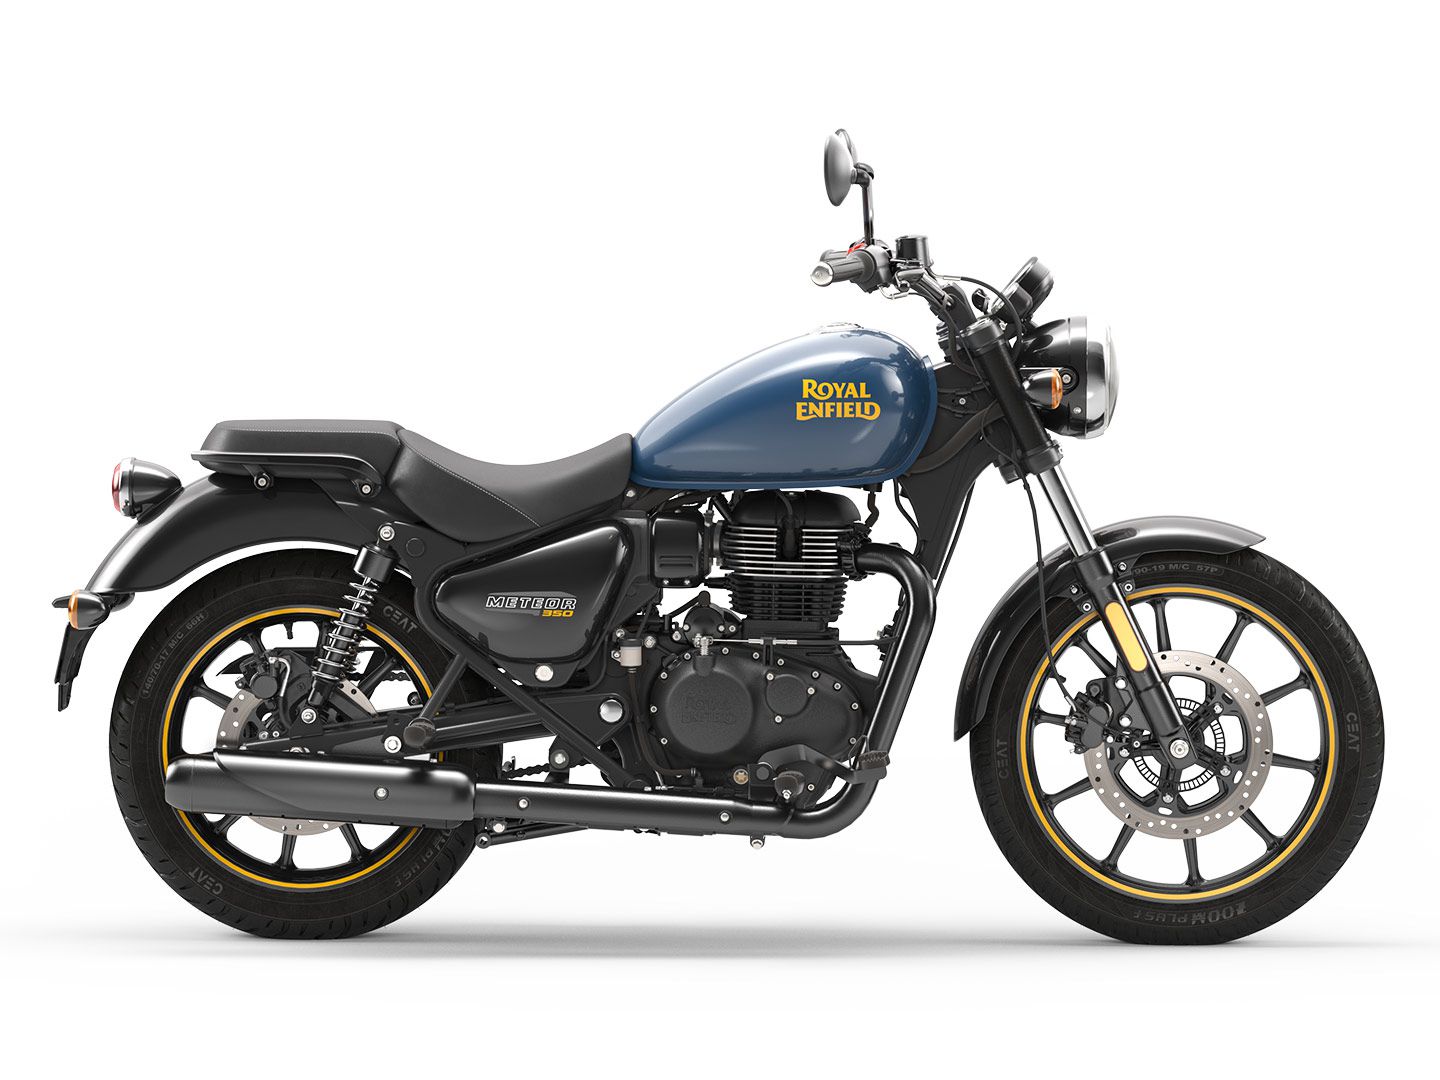 With a starting price of $4,699, the Royal Enfield Meteor 350 is a great deal.